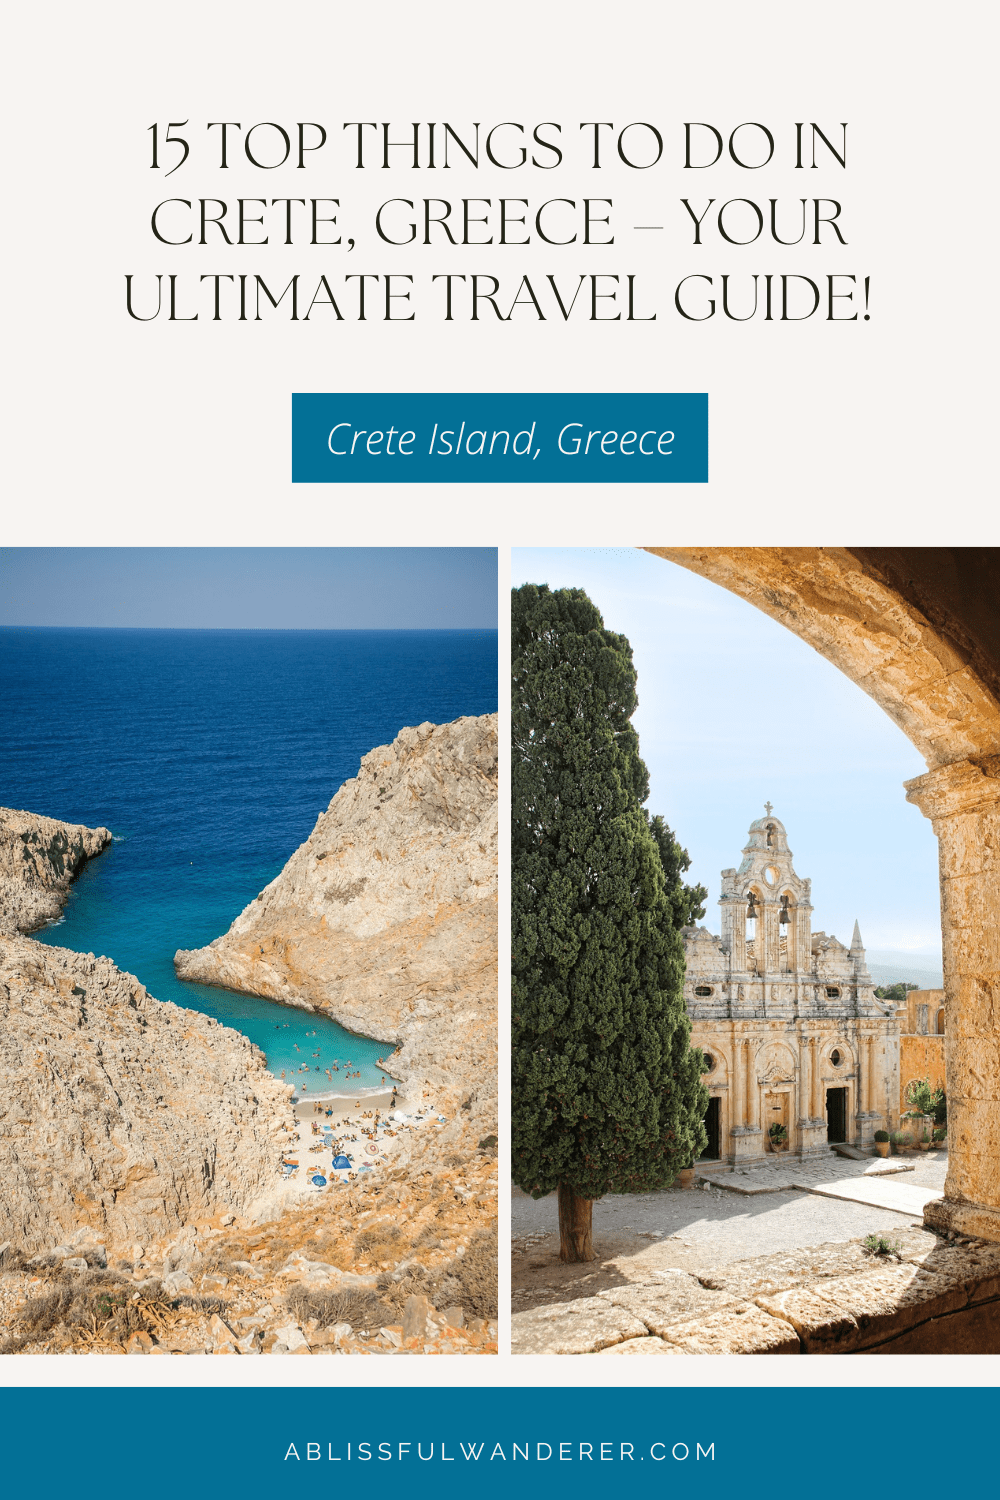 Discover the best of Crete, Greece with our list of 15 top things to do. From exploring ancient ruins to relaxing on pristine beaches, there's something for everyone! Pin